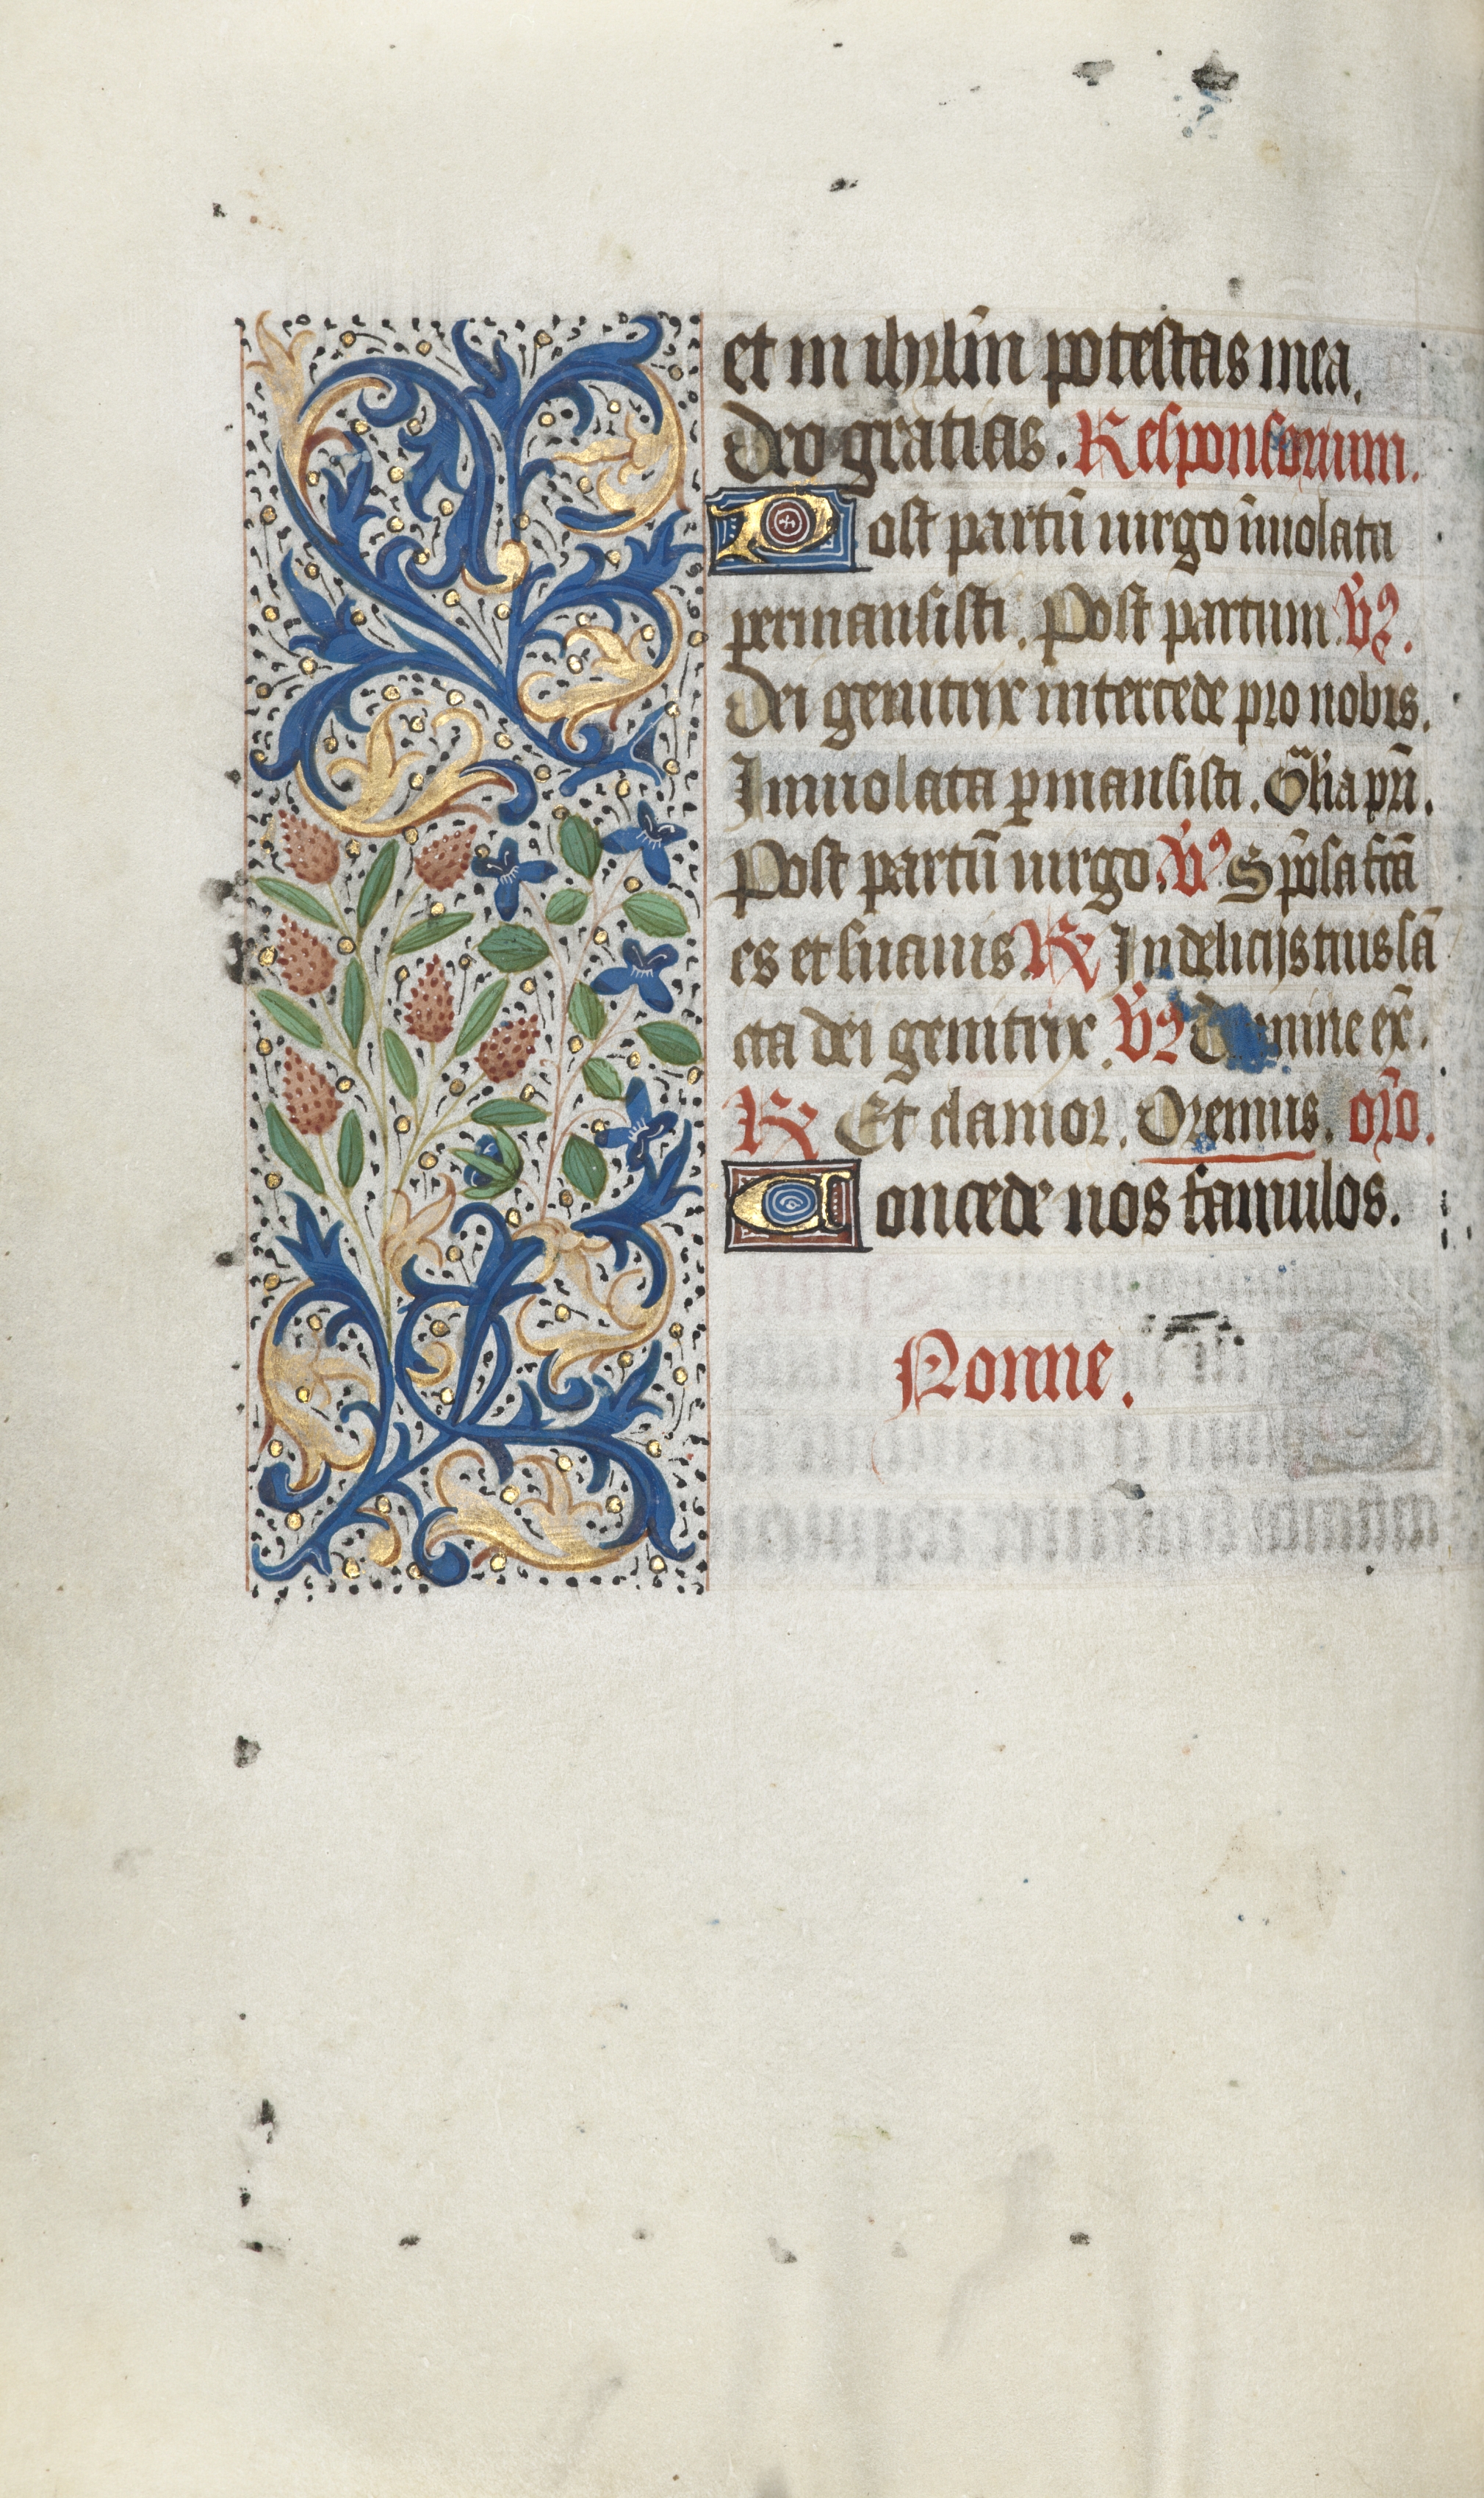 Book of Hours (Use of Rouen): fol. 66v